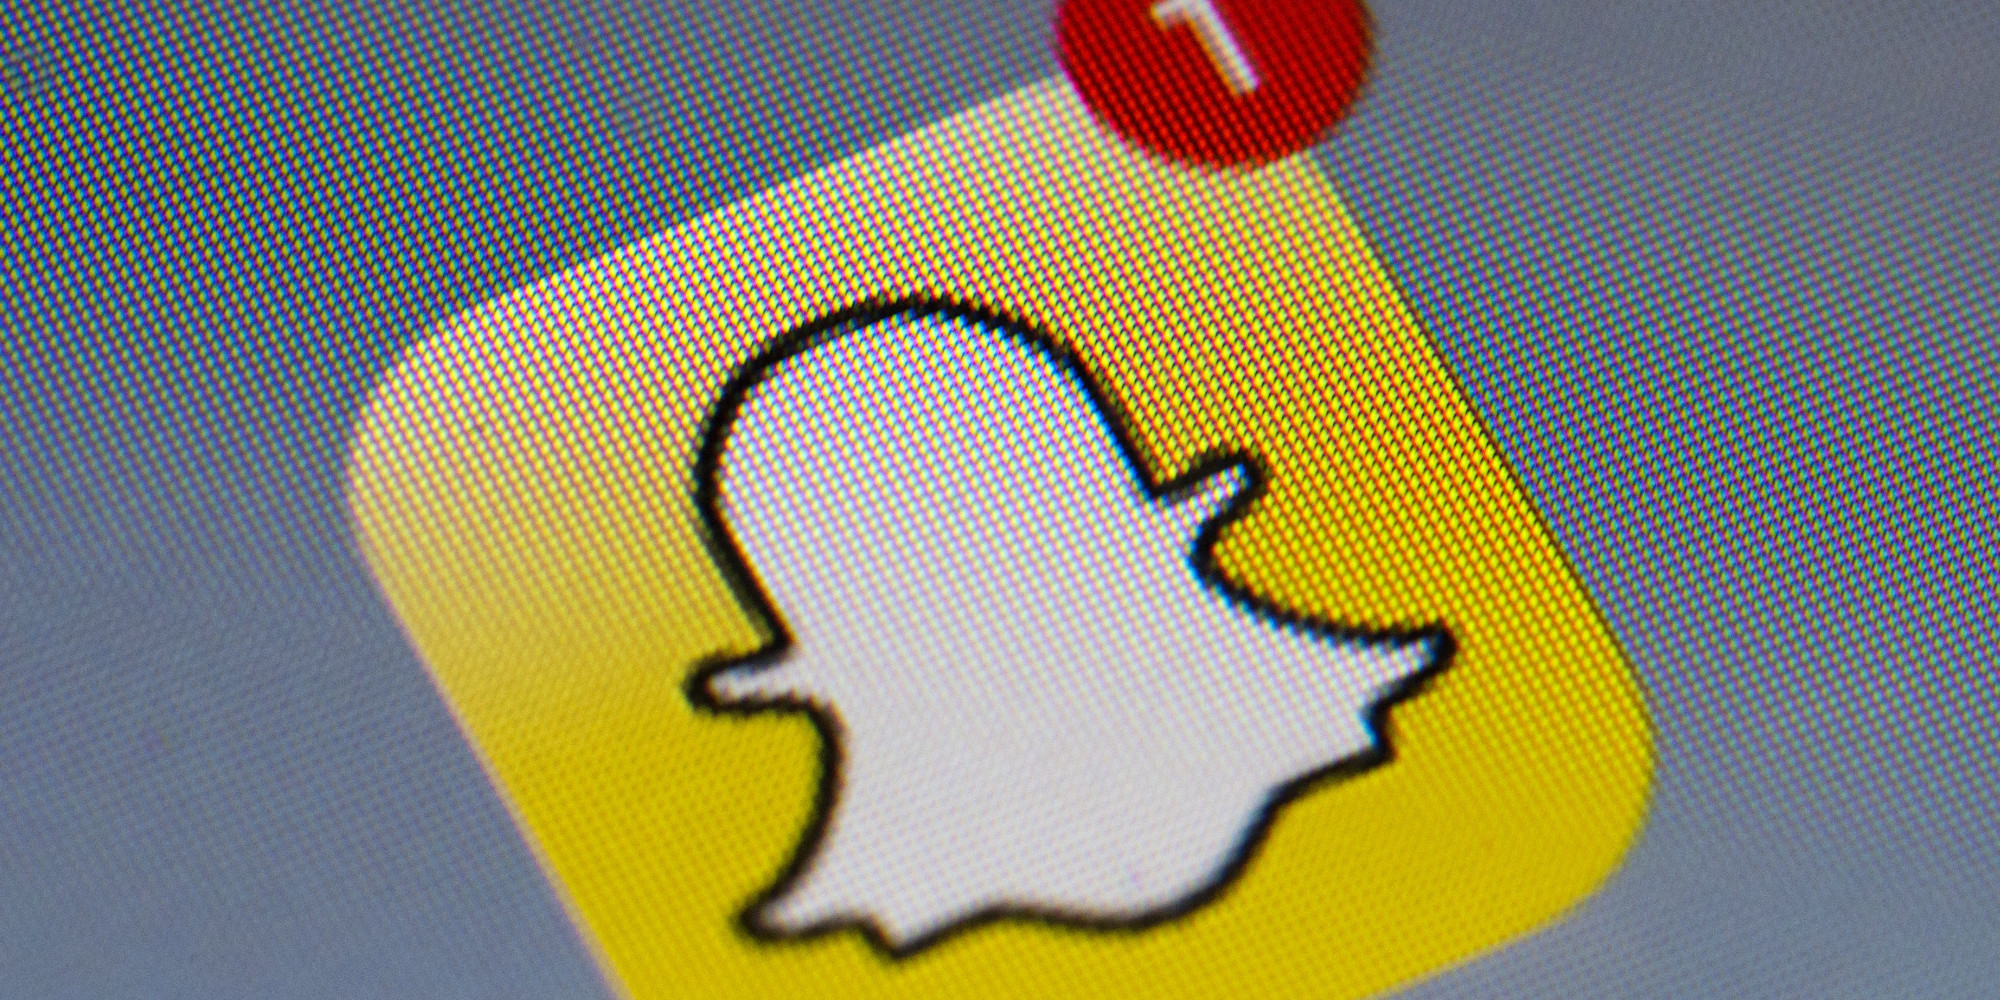 Snapchat Finally Responds To Hack, But Doesn't Apologize ...